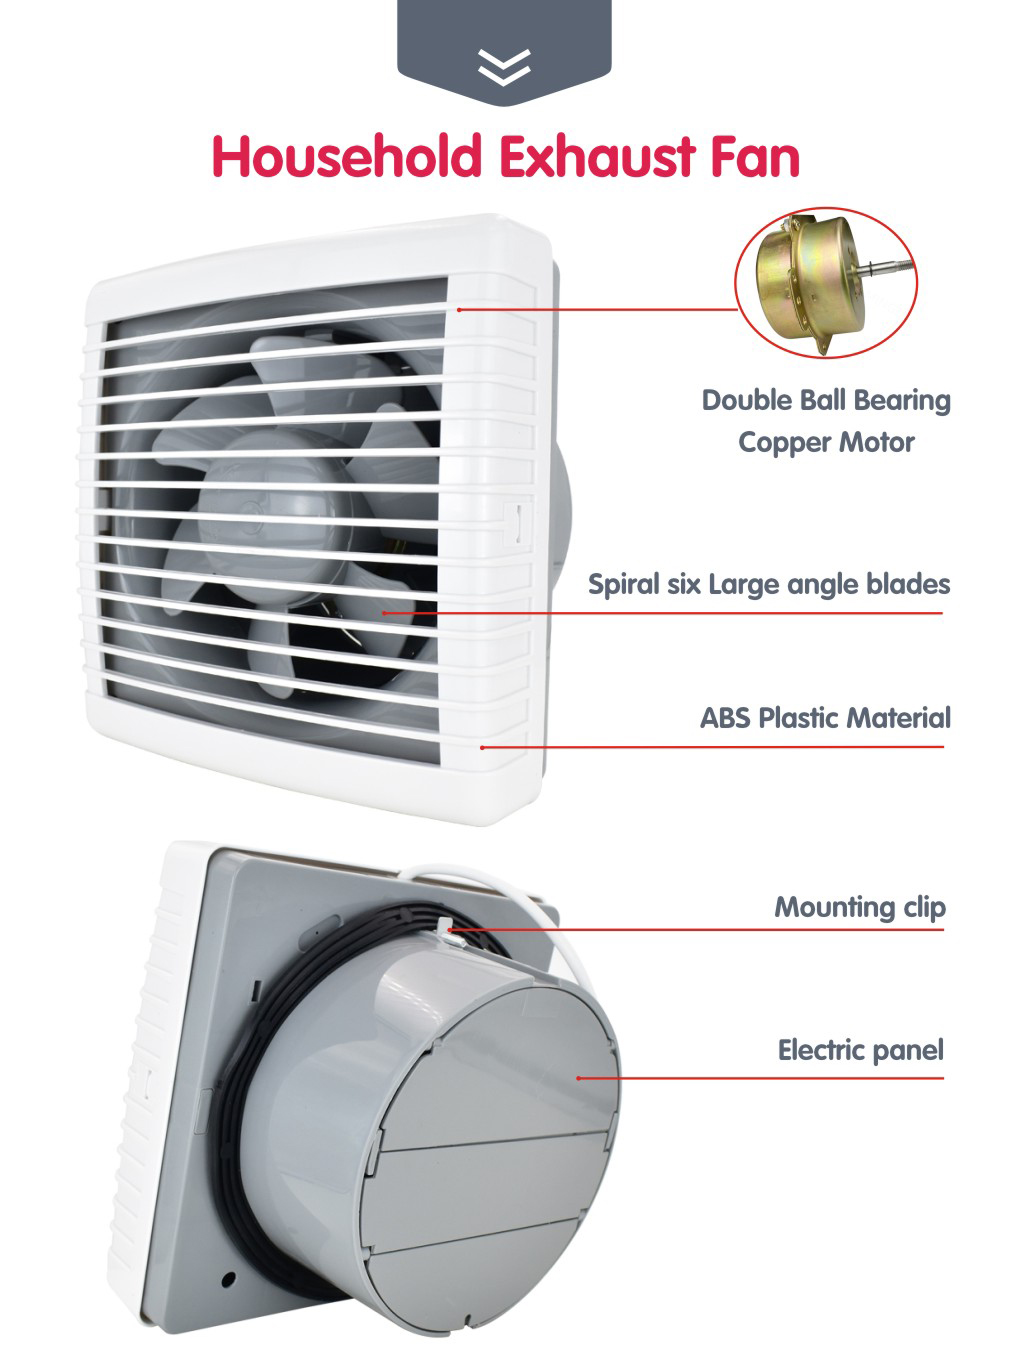 product details of each part for exhaust fan